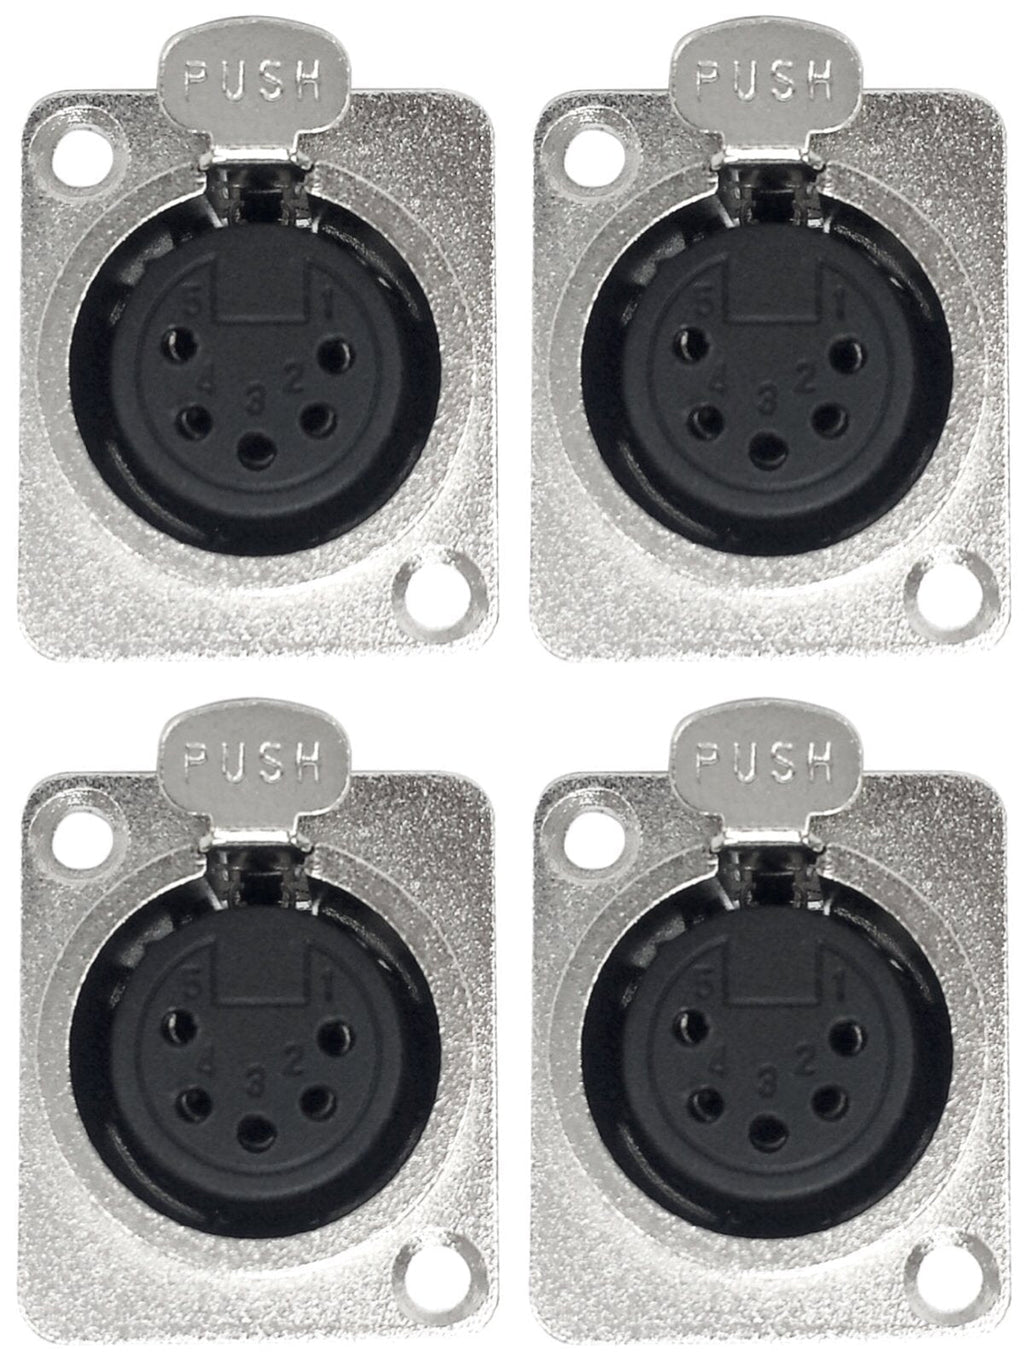  [AUSTRALIA] - CESS 5 Pin XLR Female Socket Connector Panel/Chassis Mount (jcx) (4 Pack)